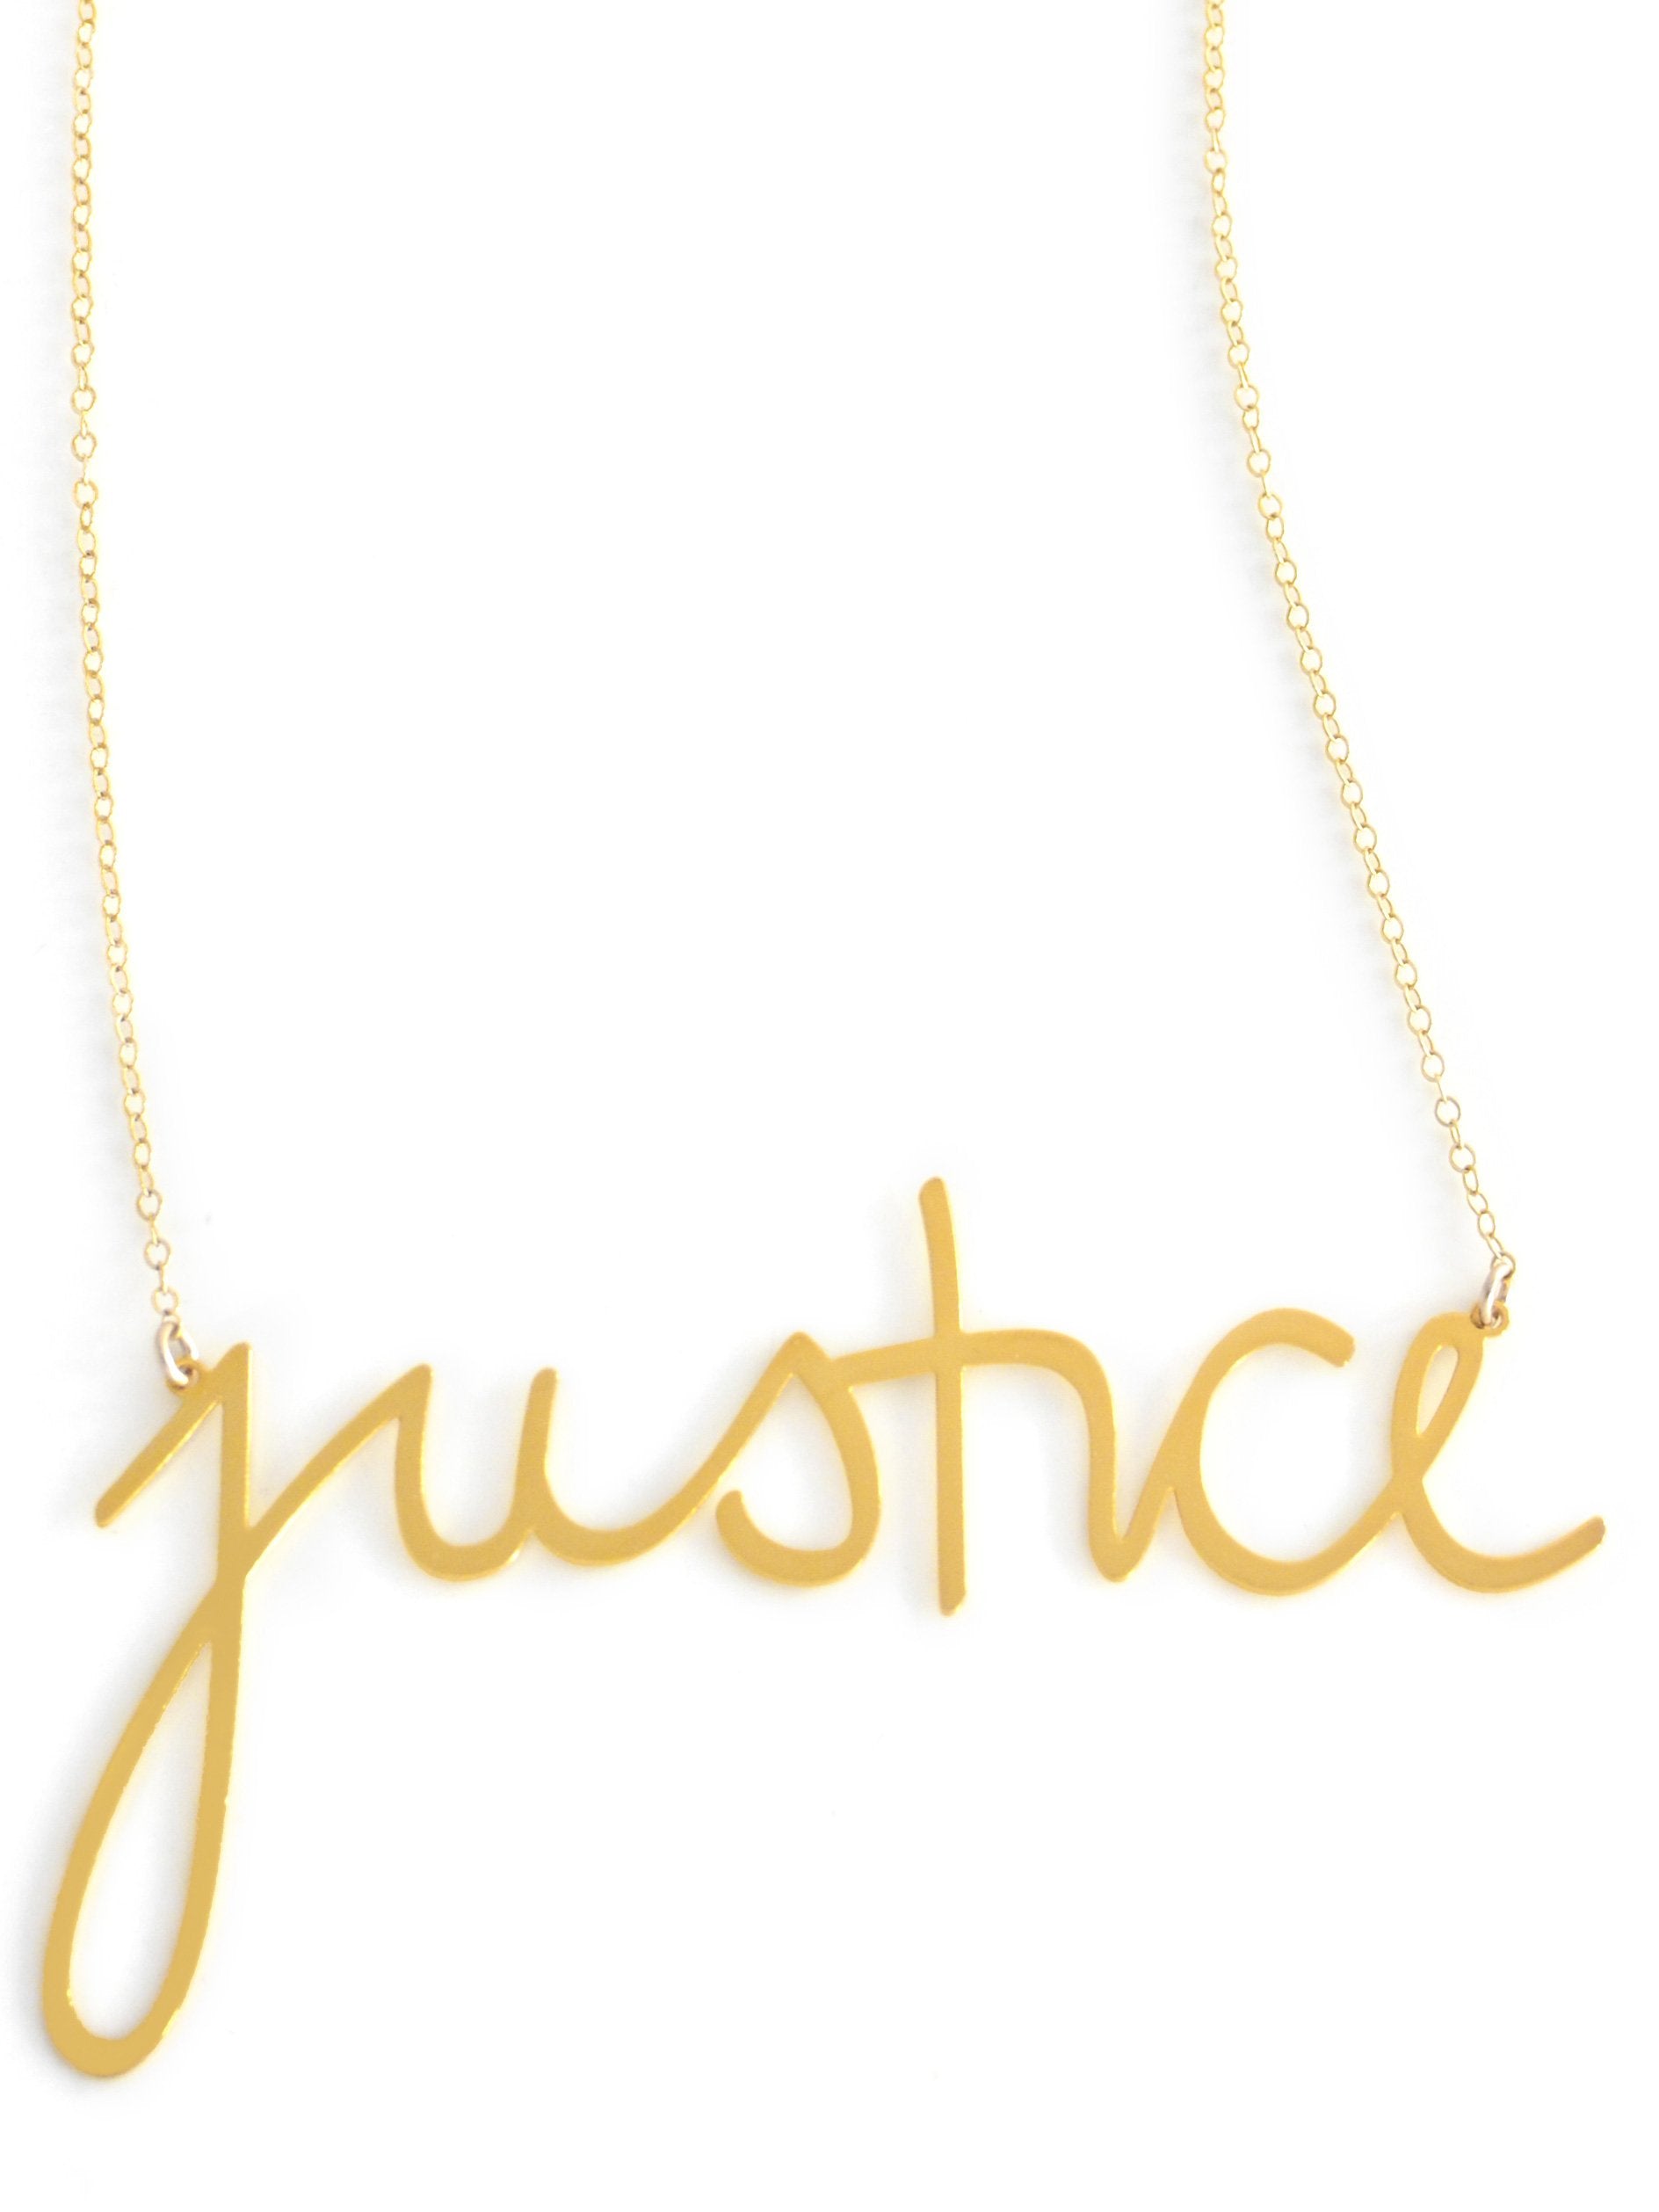 Justice Necklace - High Quality, Affordable, Hand Written, Empowering, Self Love, Mantra Word Necklace - Available in Gold and Silver - Small and Large Sizes - Made in USA - Brevity Jewelry